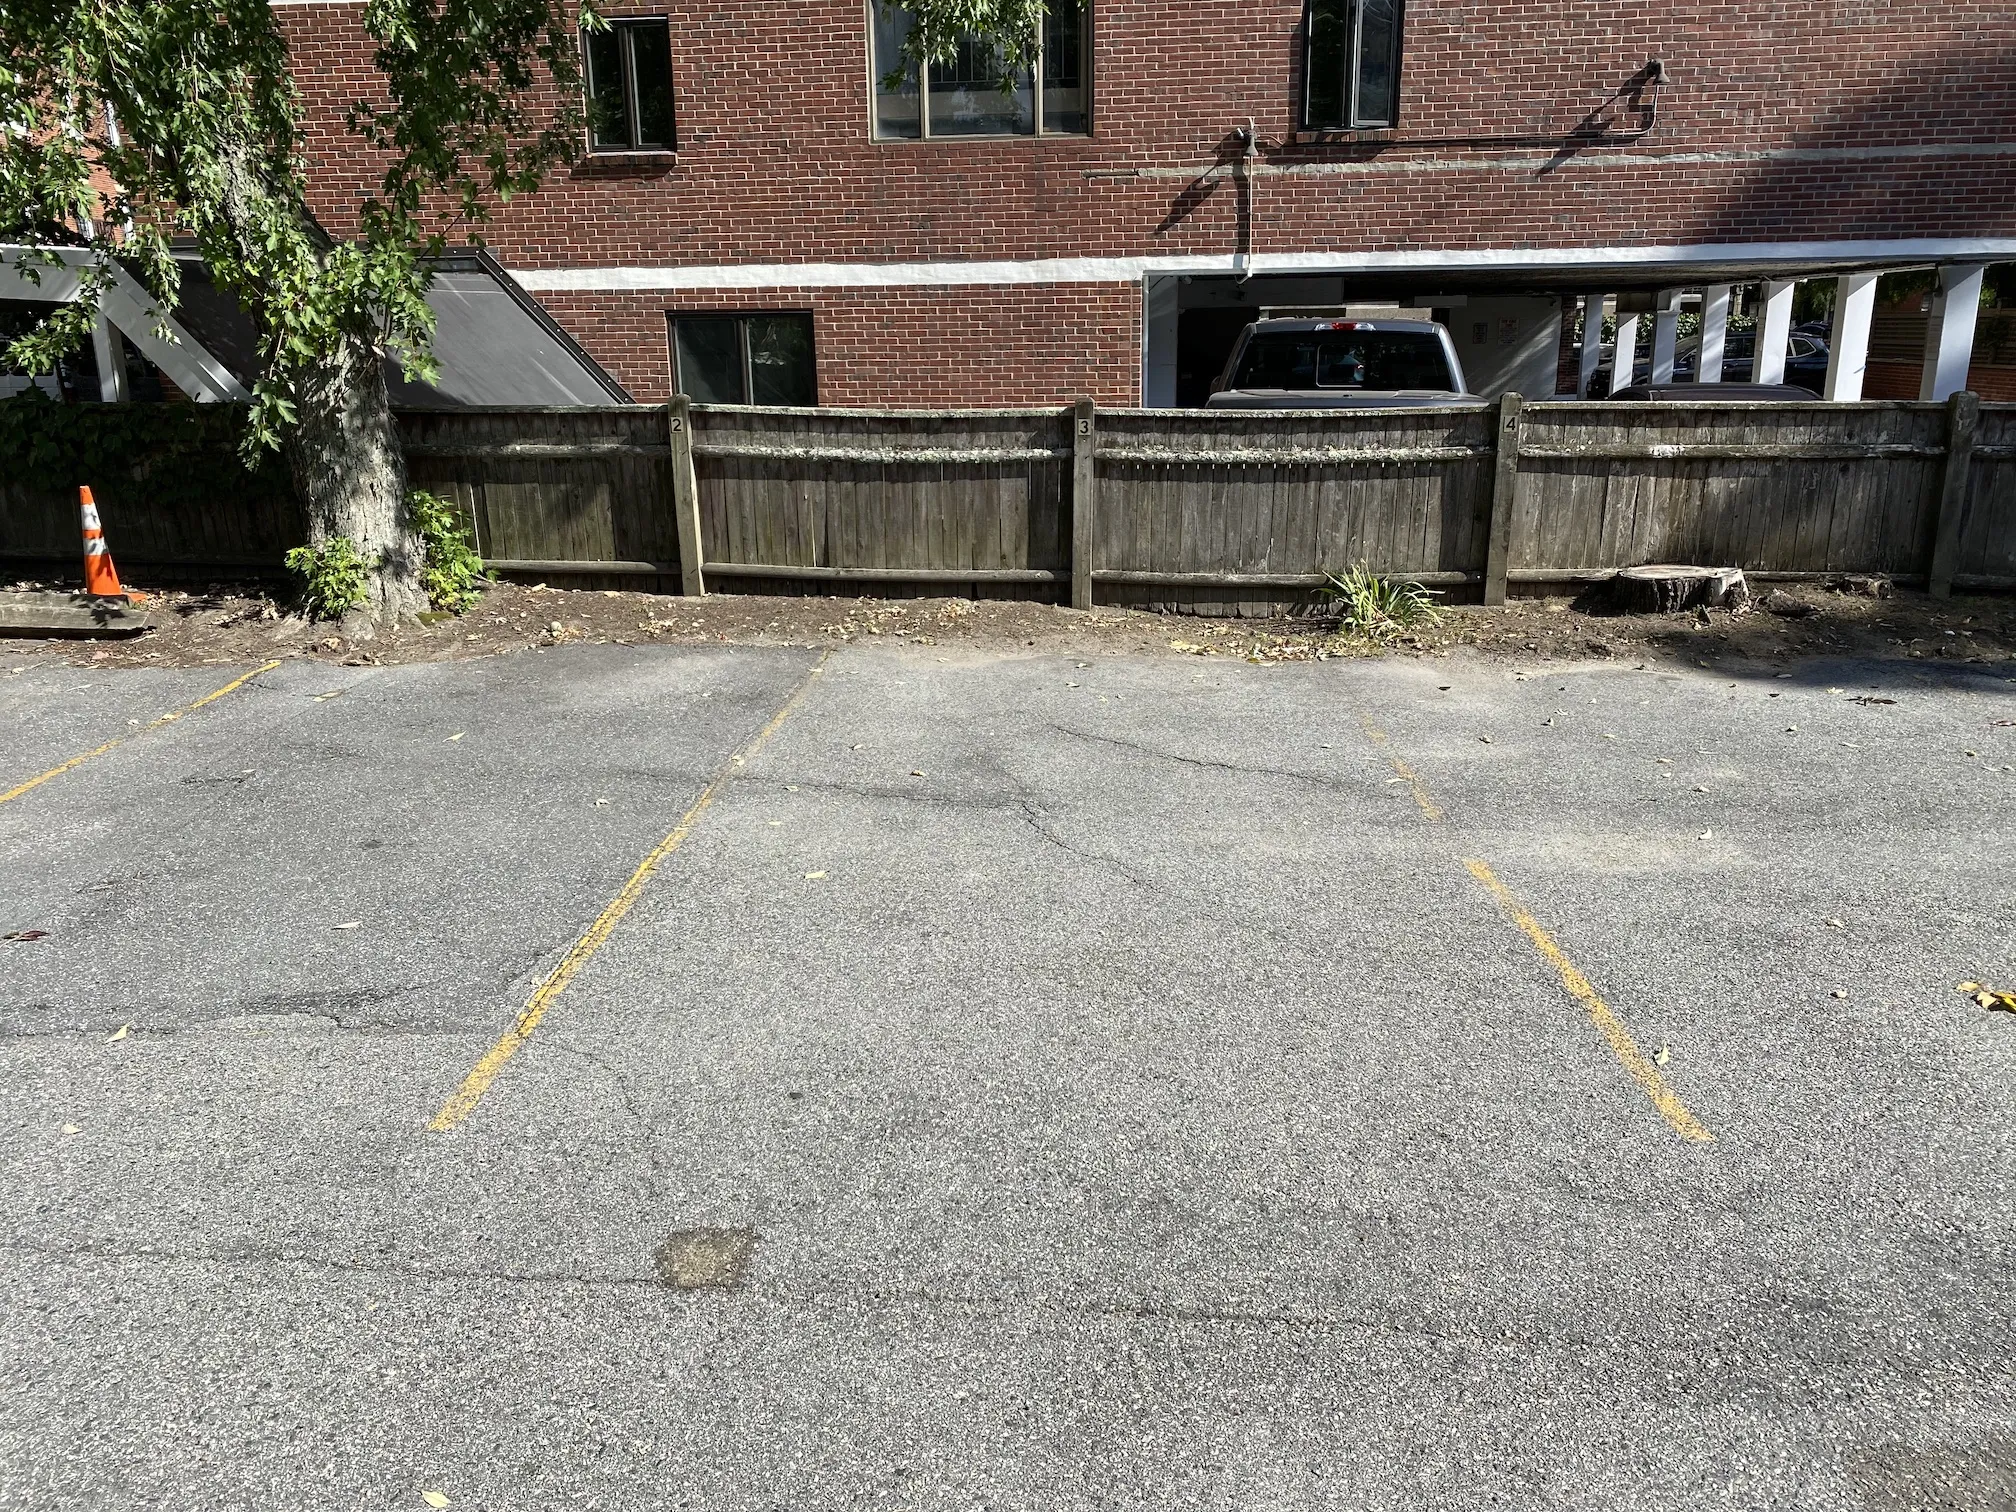 Parking, Garages And Car Spaces For Rent - Off Street Parking In Central Square